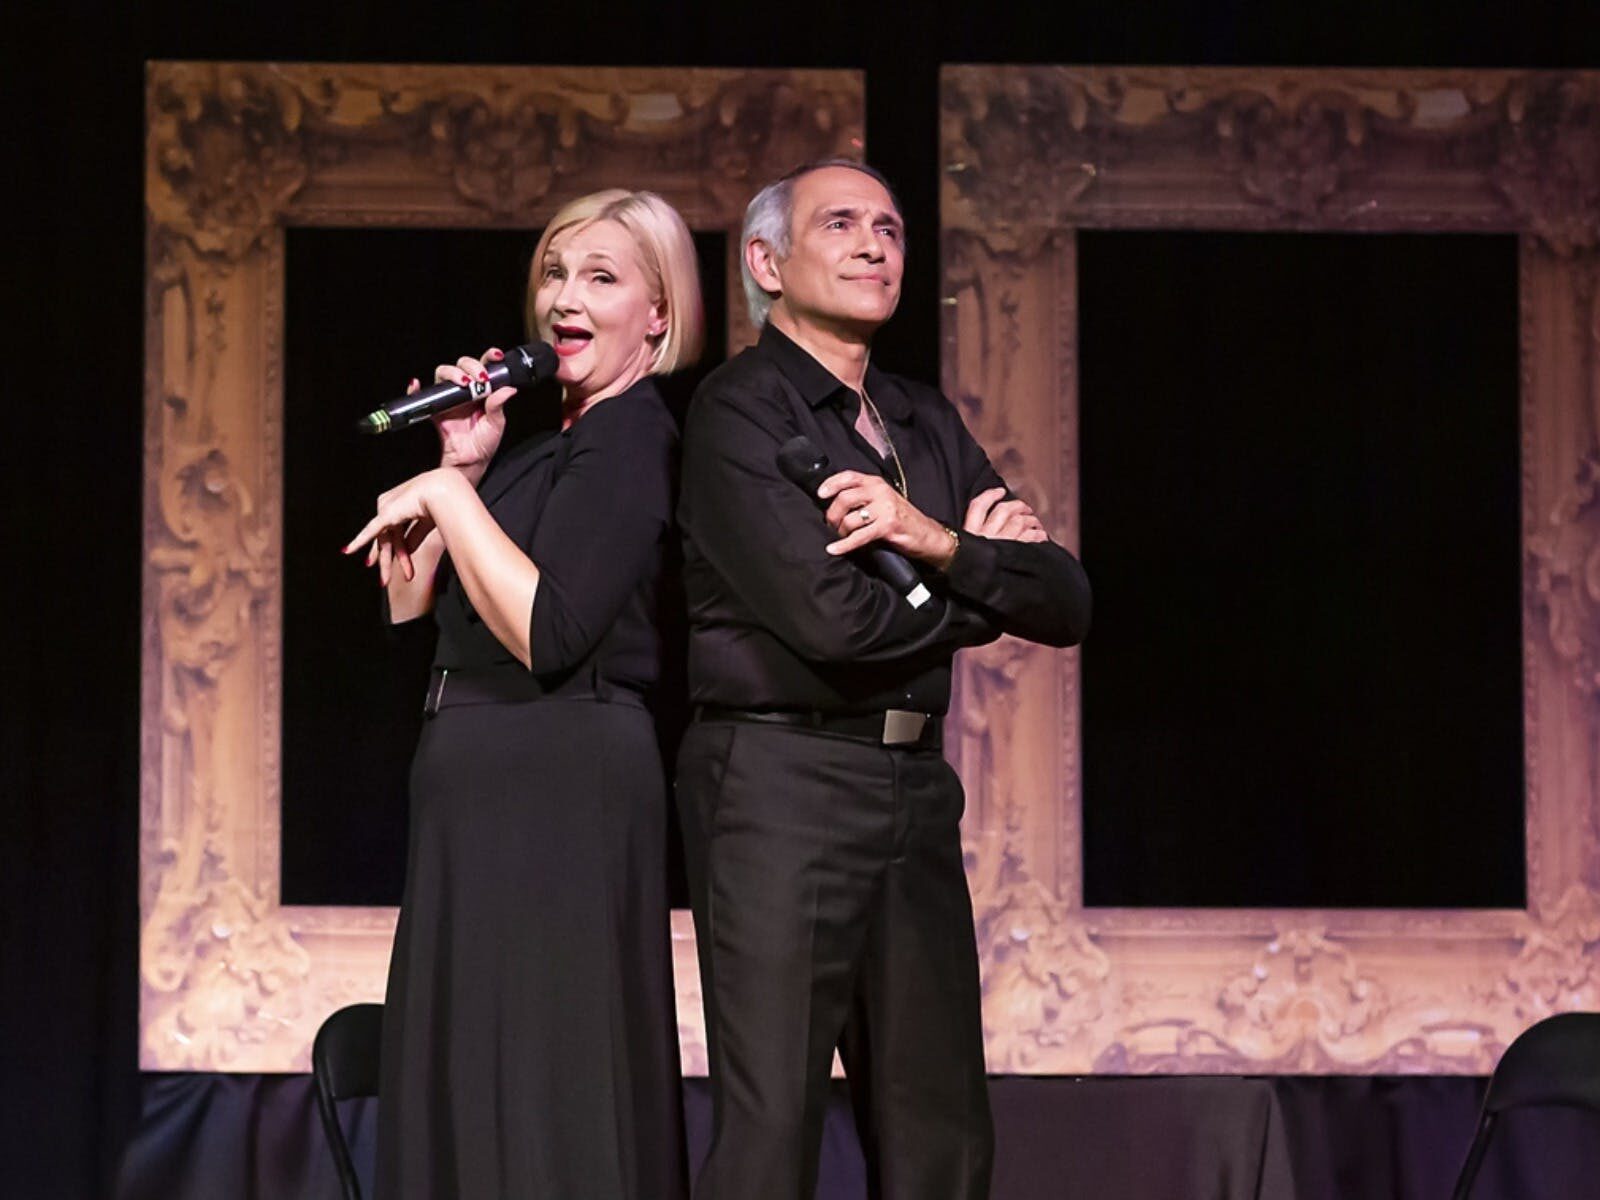 Two performers on stage mid performance looking into the distance wearing black garments